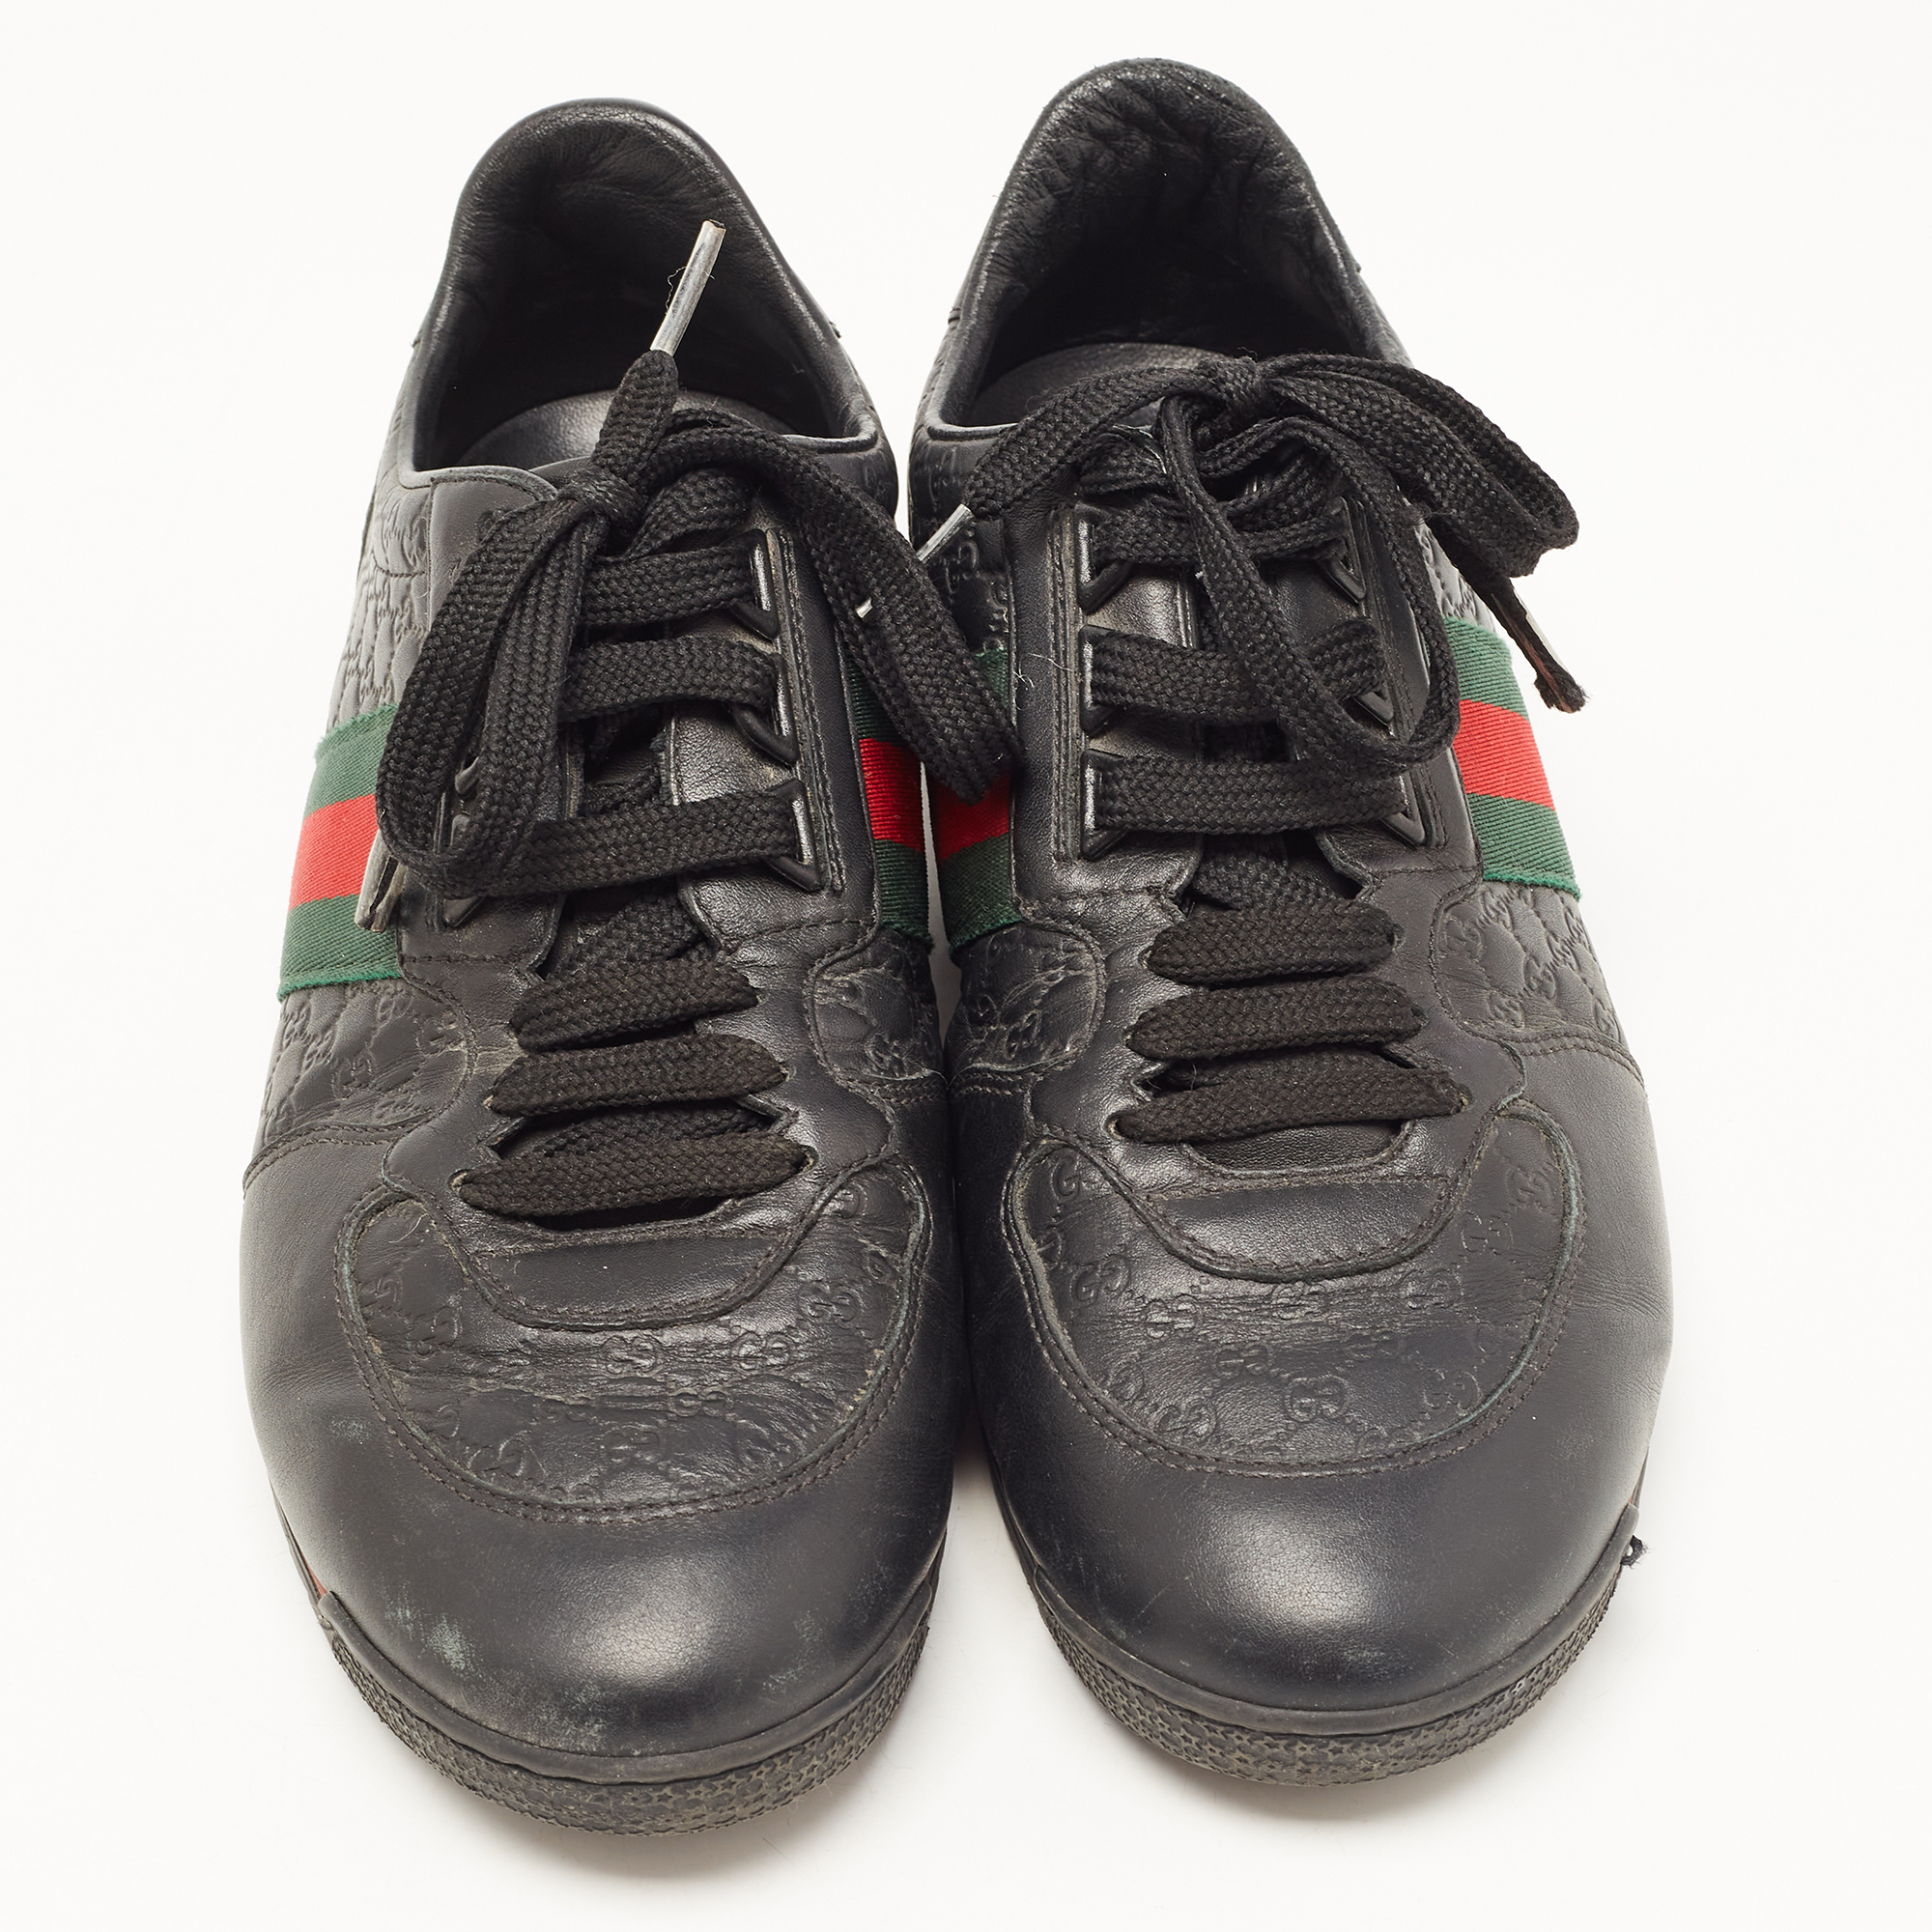 Gucci Black Microguccissima Leather Web Low Top Sneakers Size 40.5